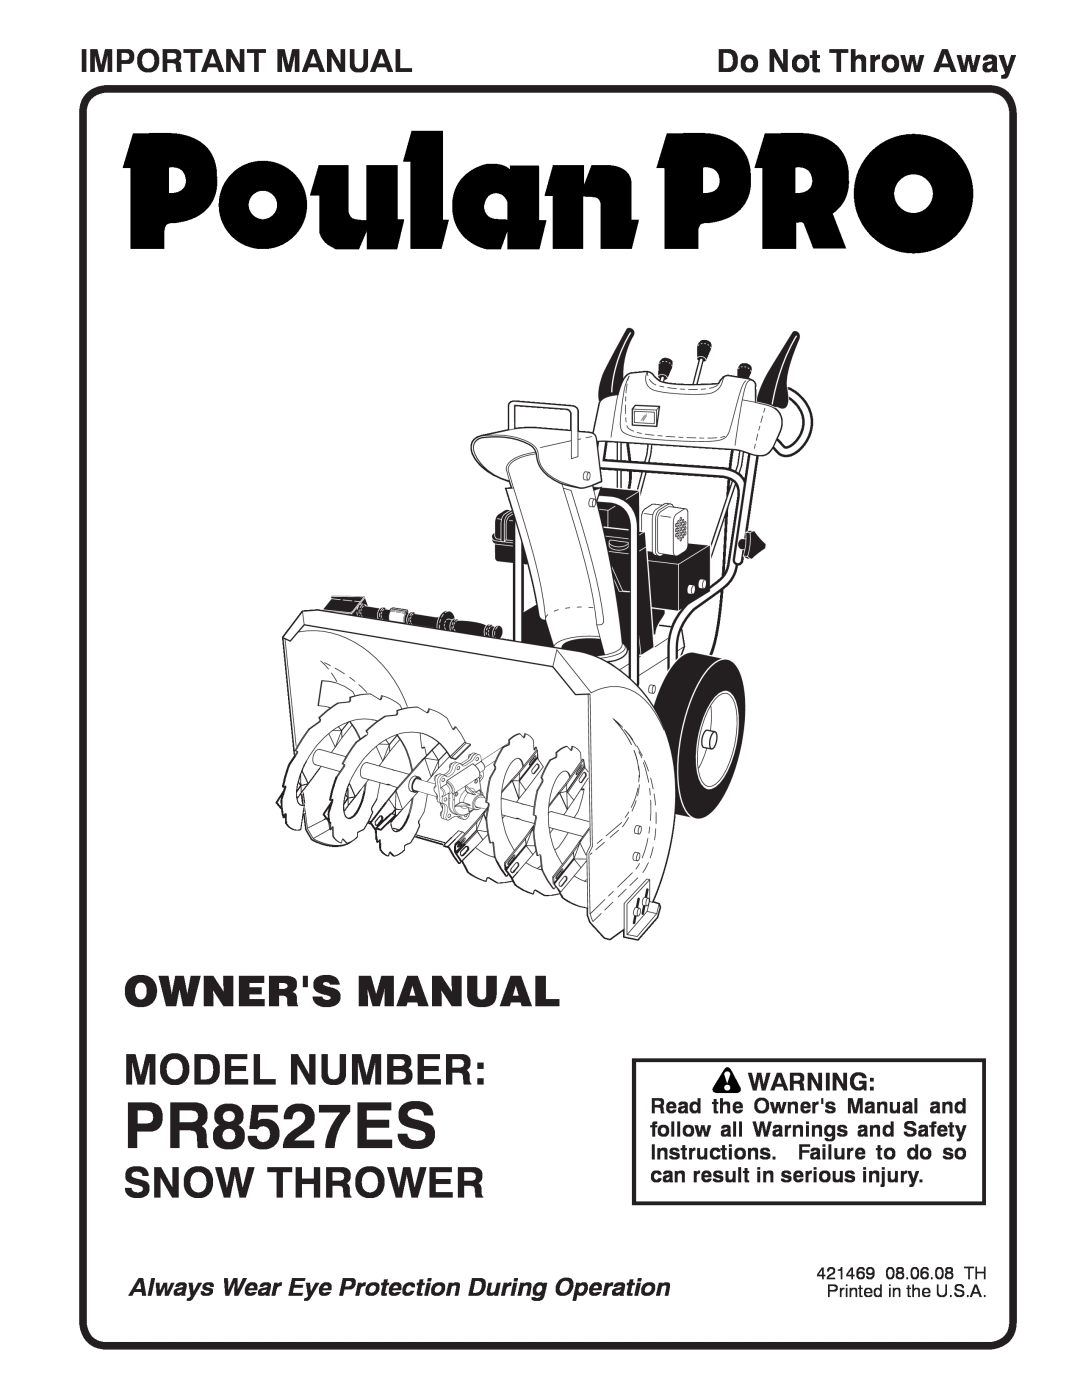 Poulan 421469 owner manual Owners Manual Model Number, Snow Thrower, Important Manual, PR8527ES, Do Not Throw Away 